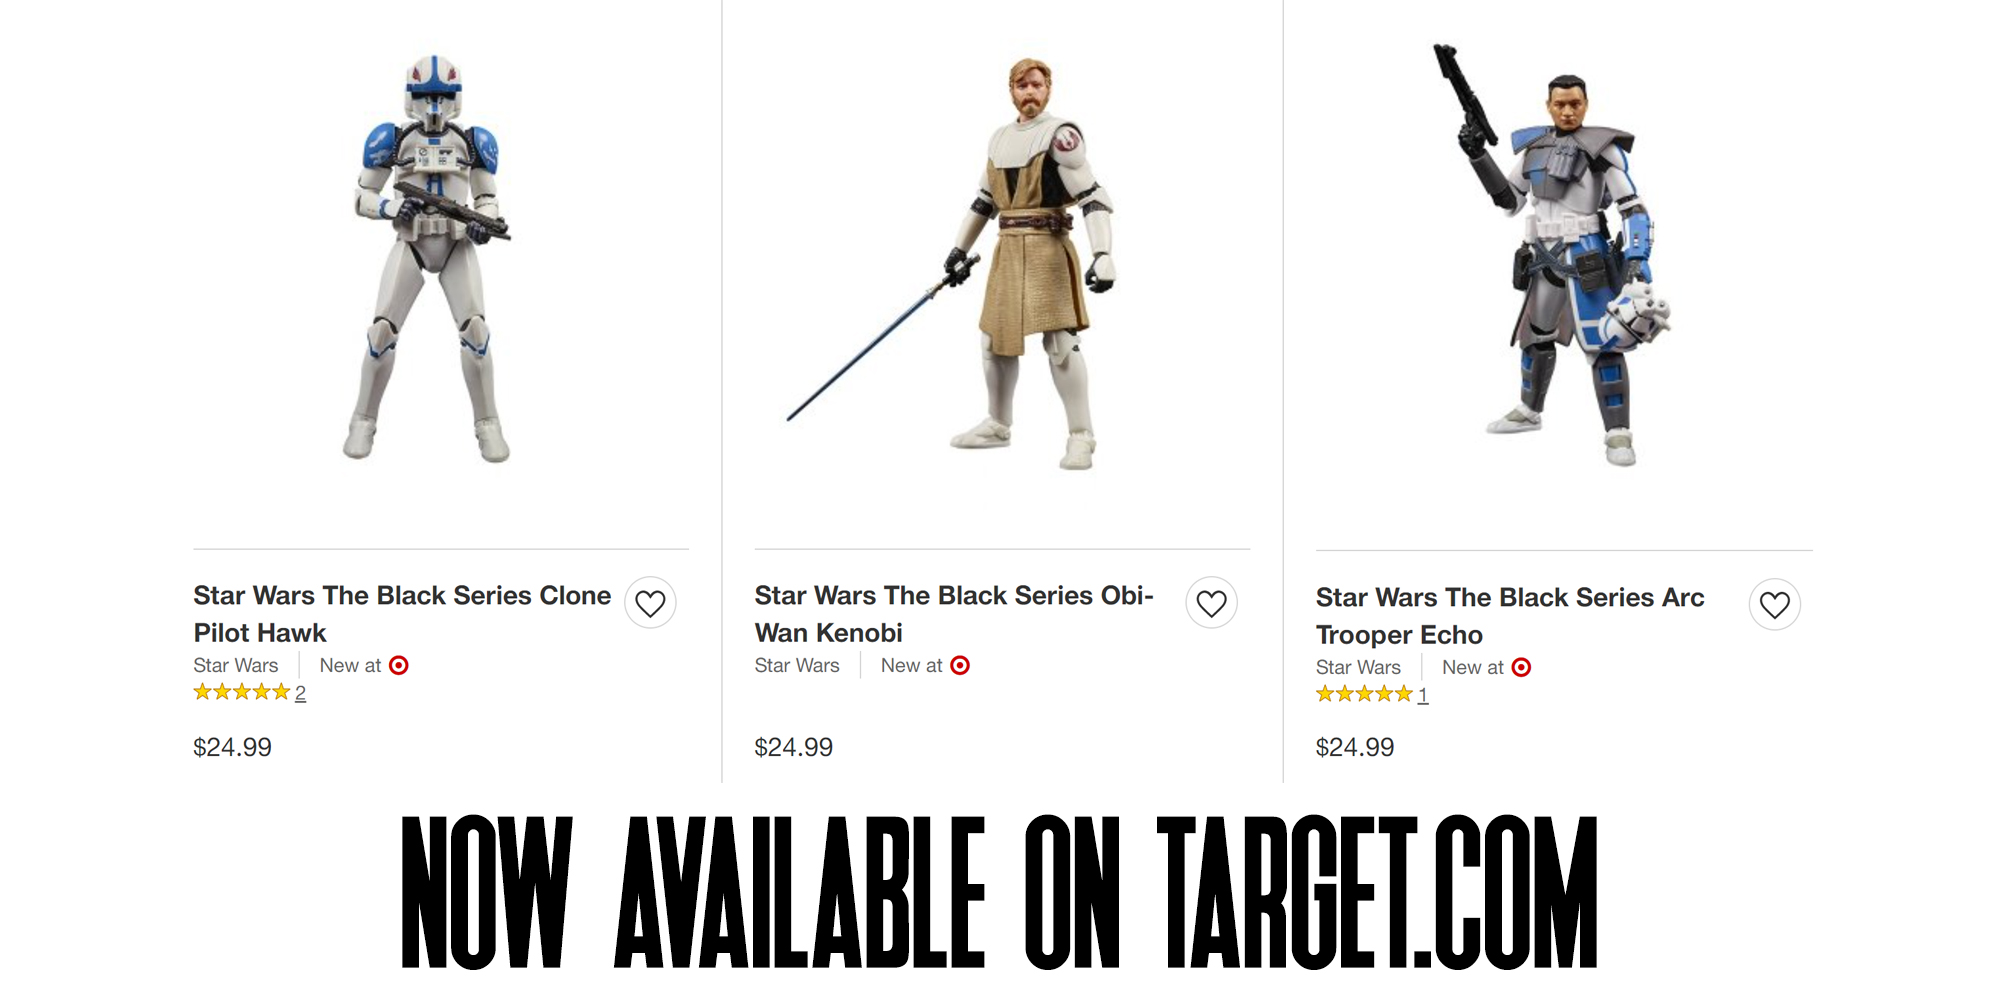 Black Series Clone Wars Figures Now Available On Target.com